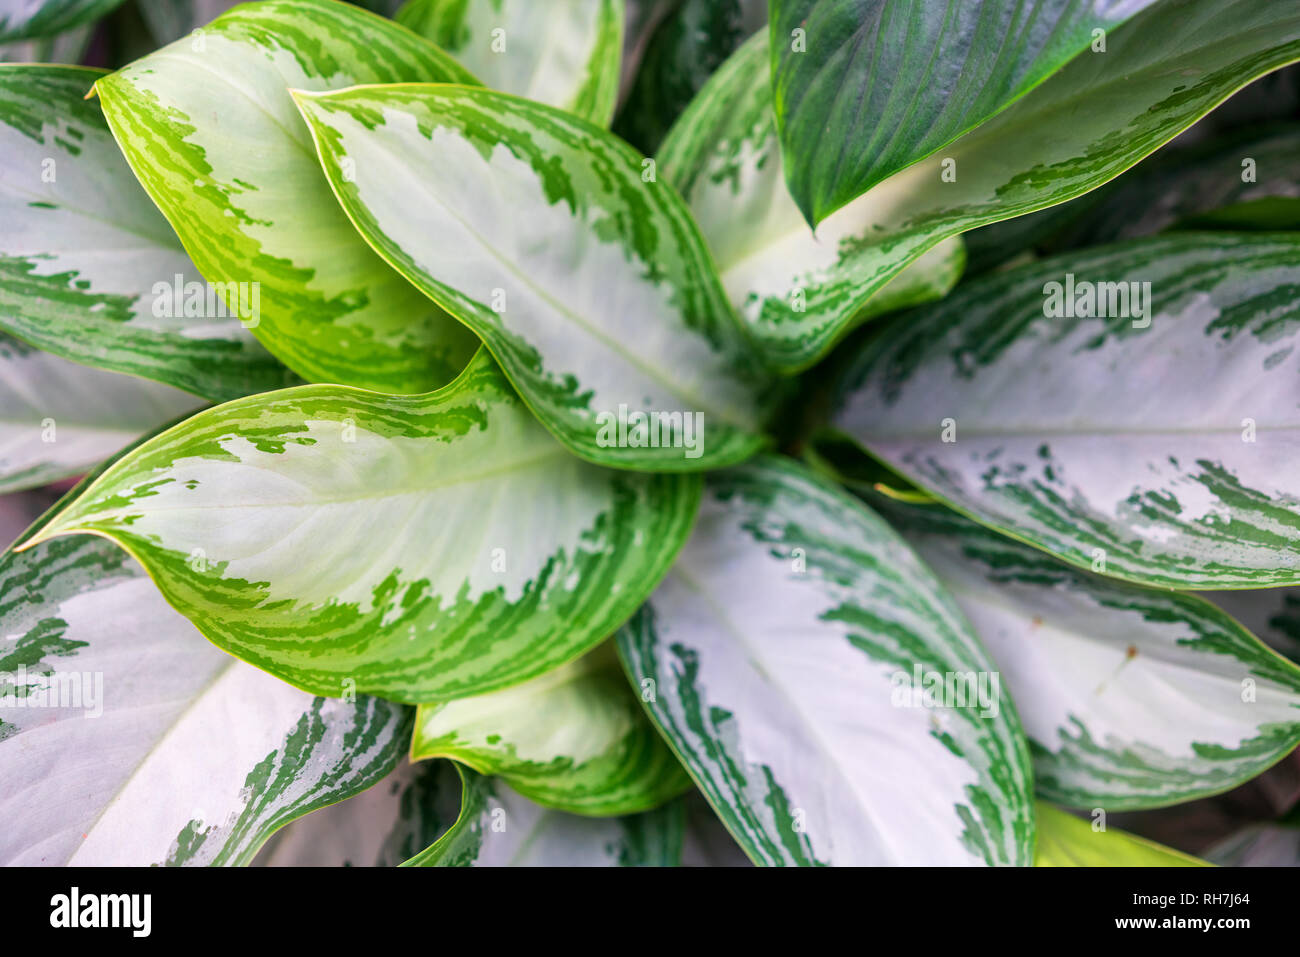 Aglaonema silver Queen with a small number of green areas on the leaves Stock Photo